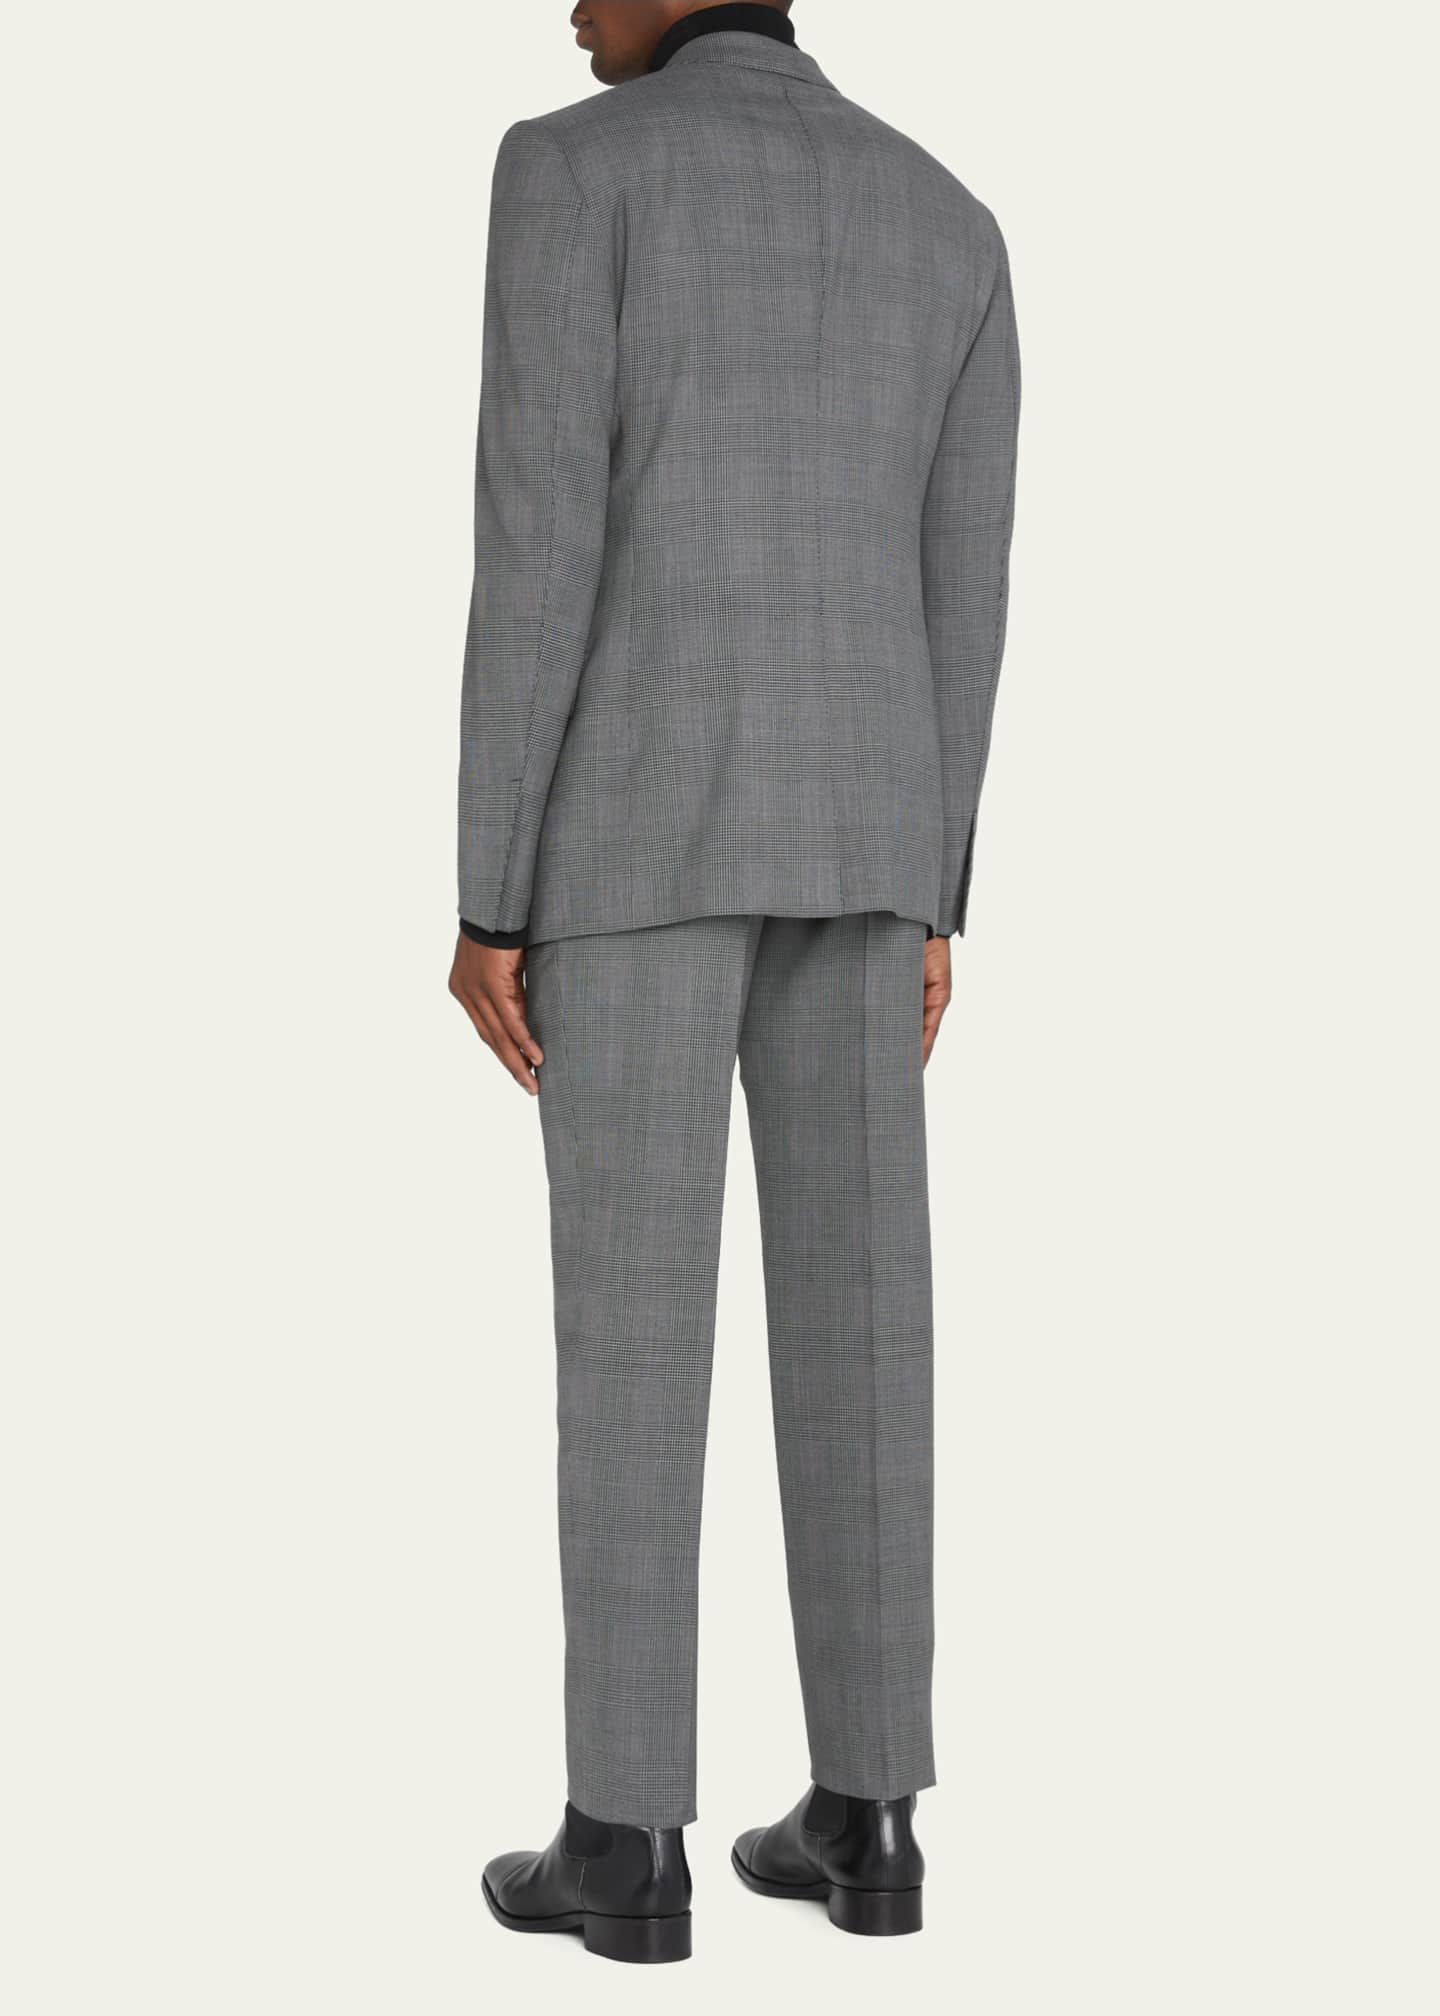 TOM FORD Men's O'Connor Prince of Wales Suit - Bergdorf Goodman